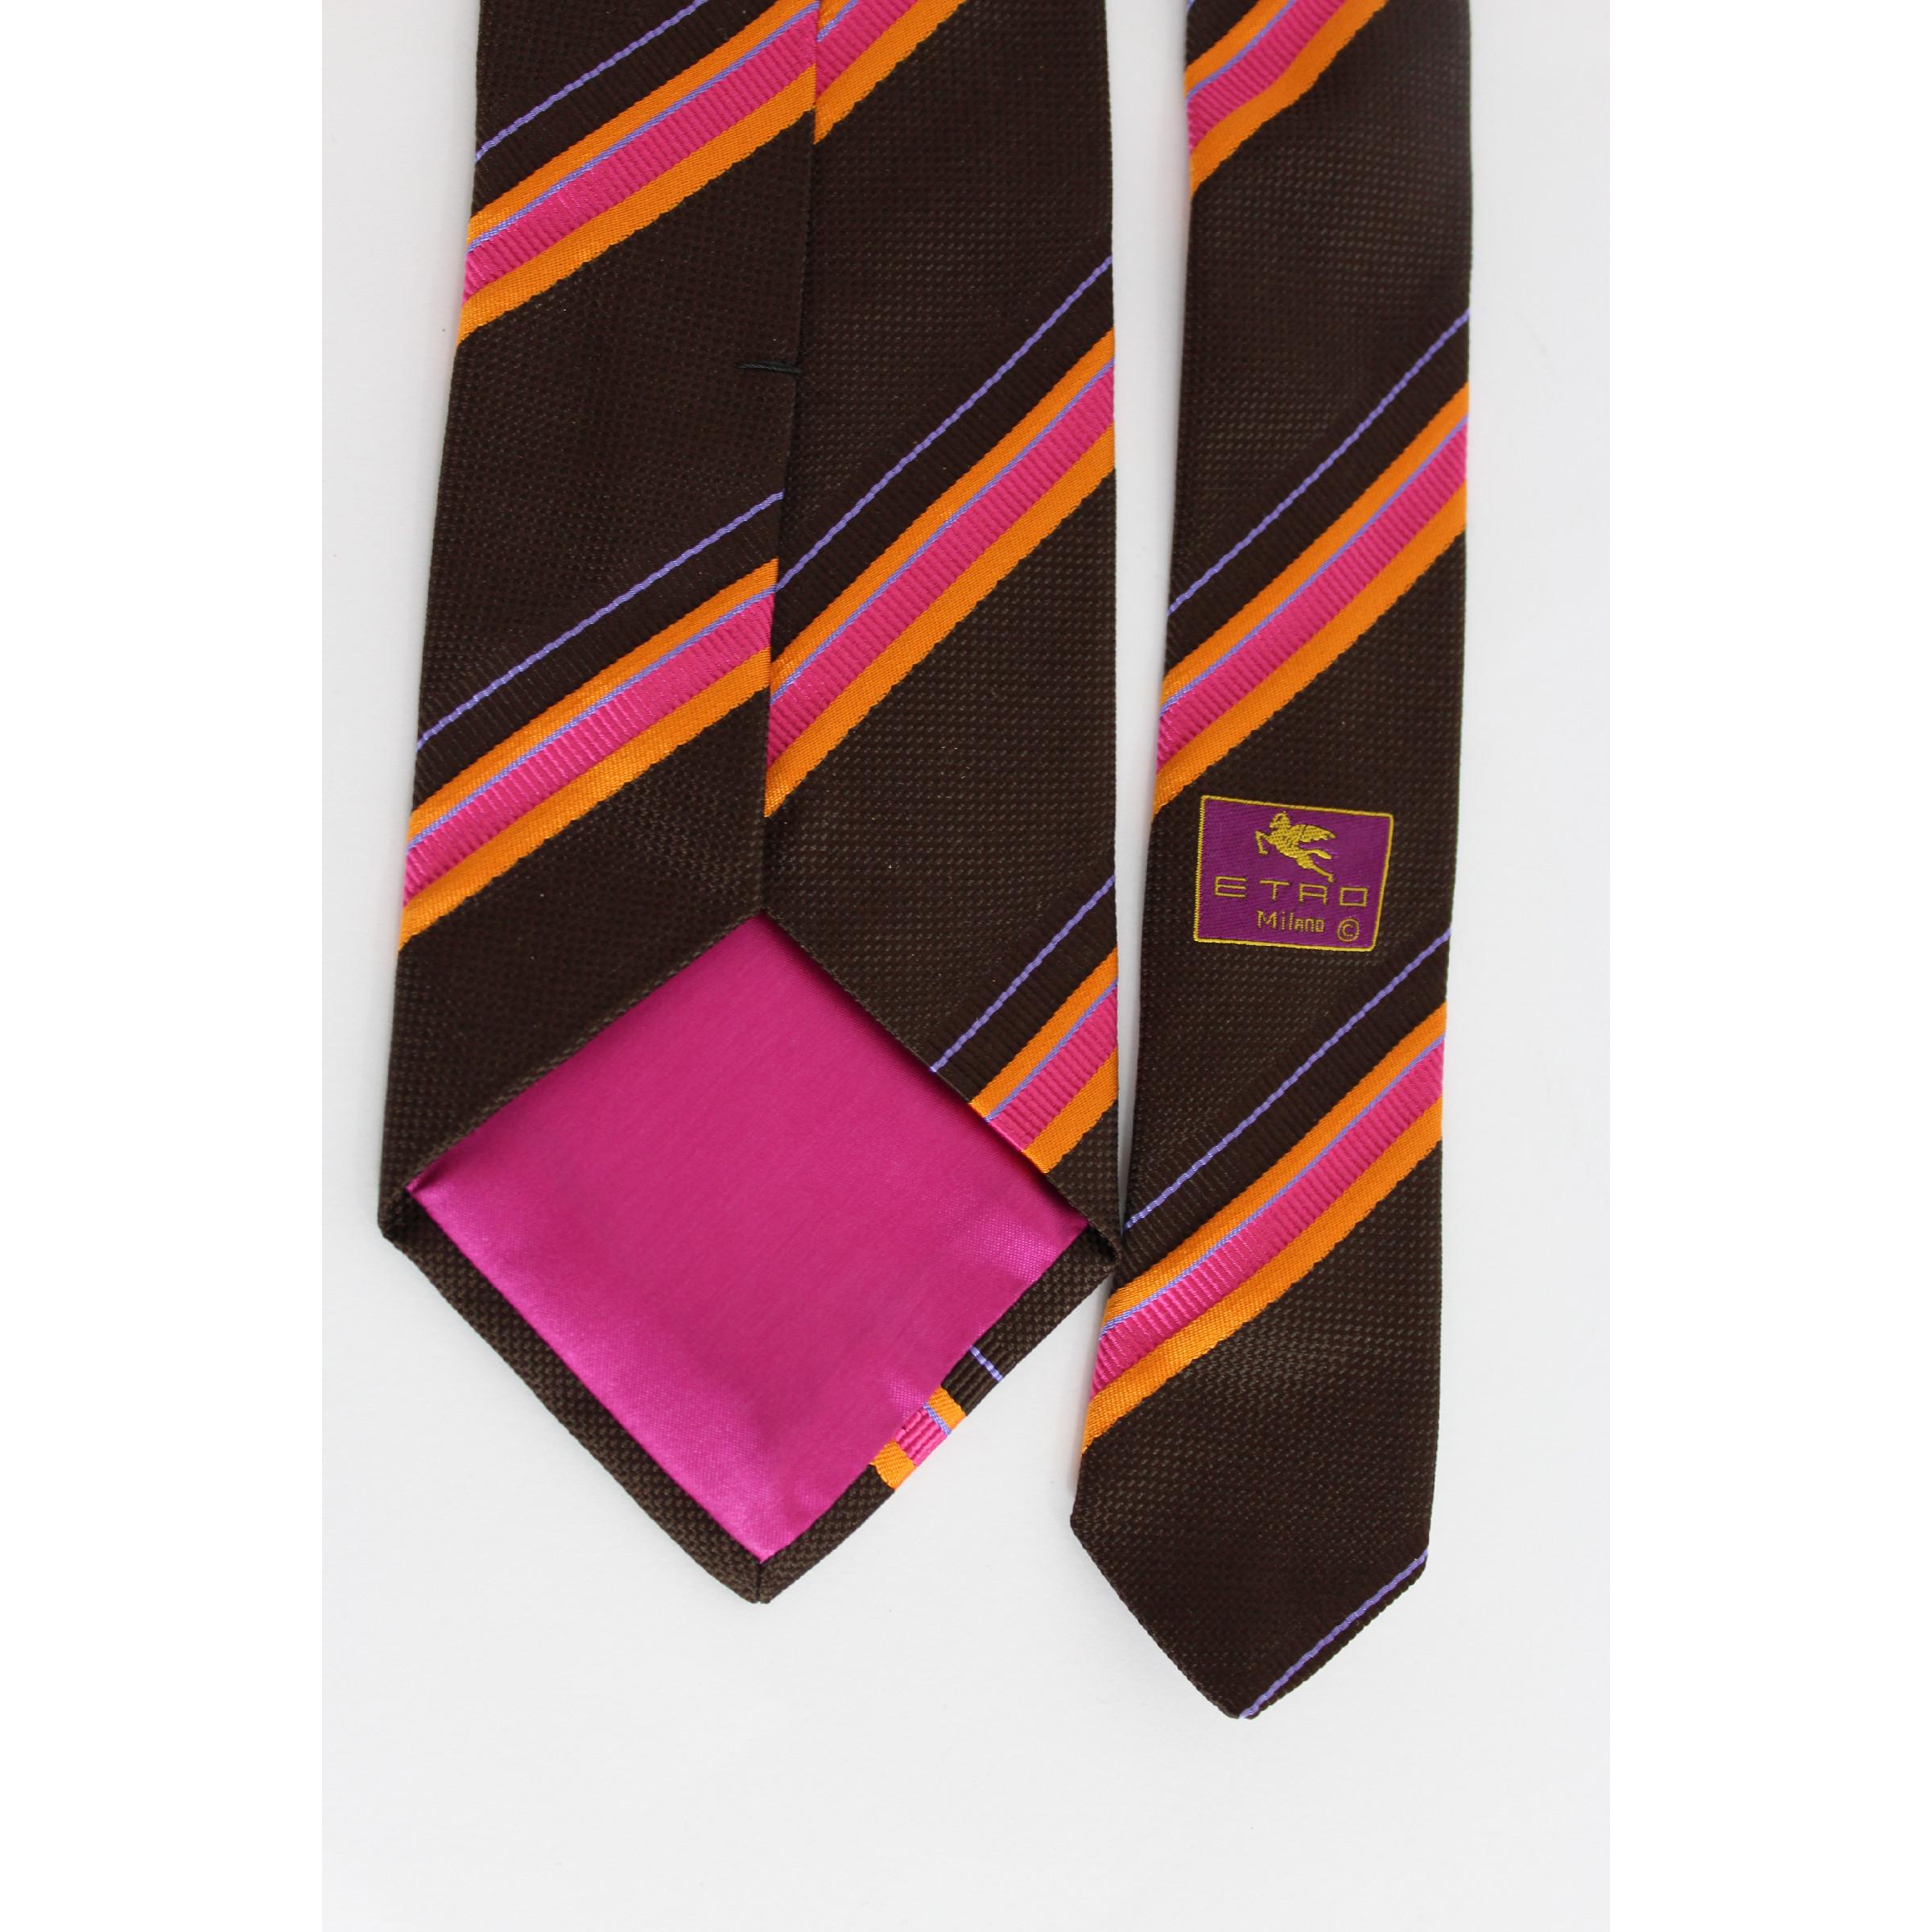 Etro vintage 90s classic tie. Striped brown and pink, 100% silk. Made italy. Excellent vintage condition.

Length: about 140 cm
Width: about 9 cm